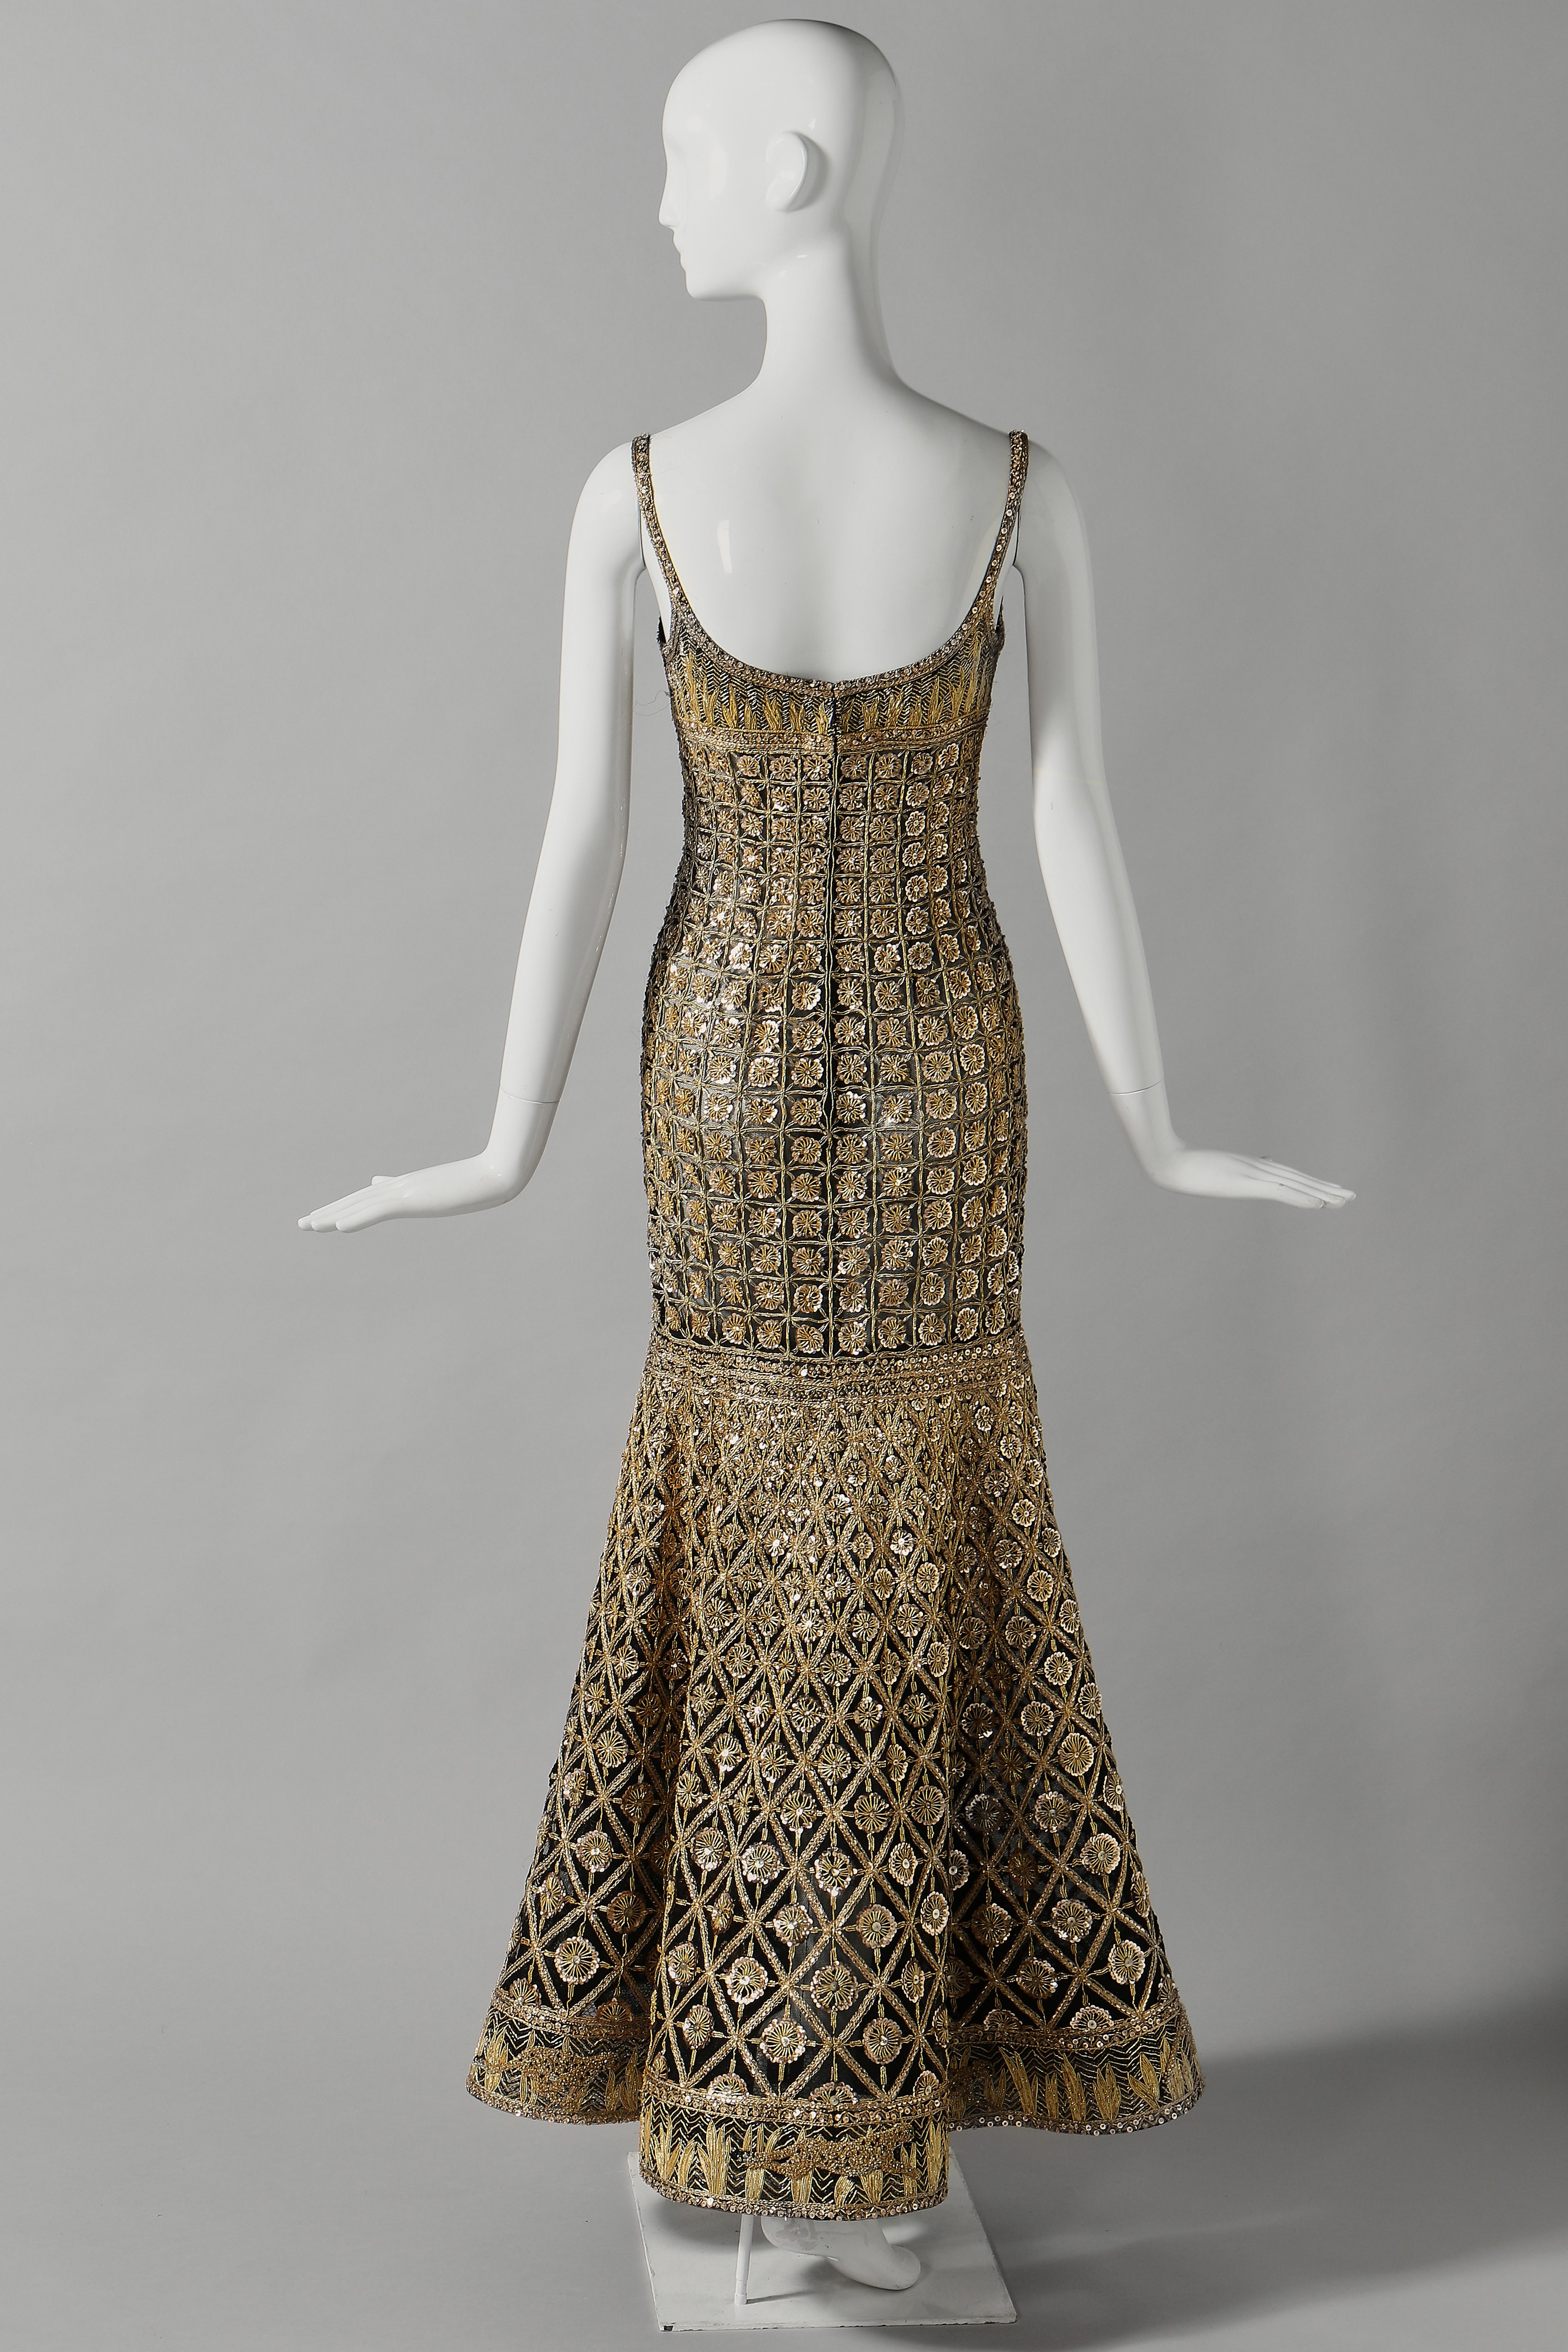 Chanel 1932. Two of my favorite dresses ever. You can never go wrong with a Chanel  dress.